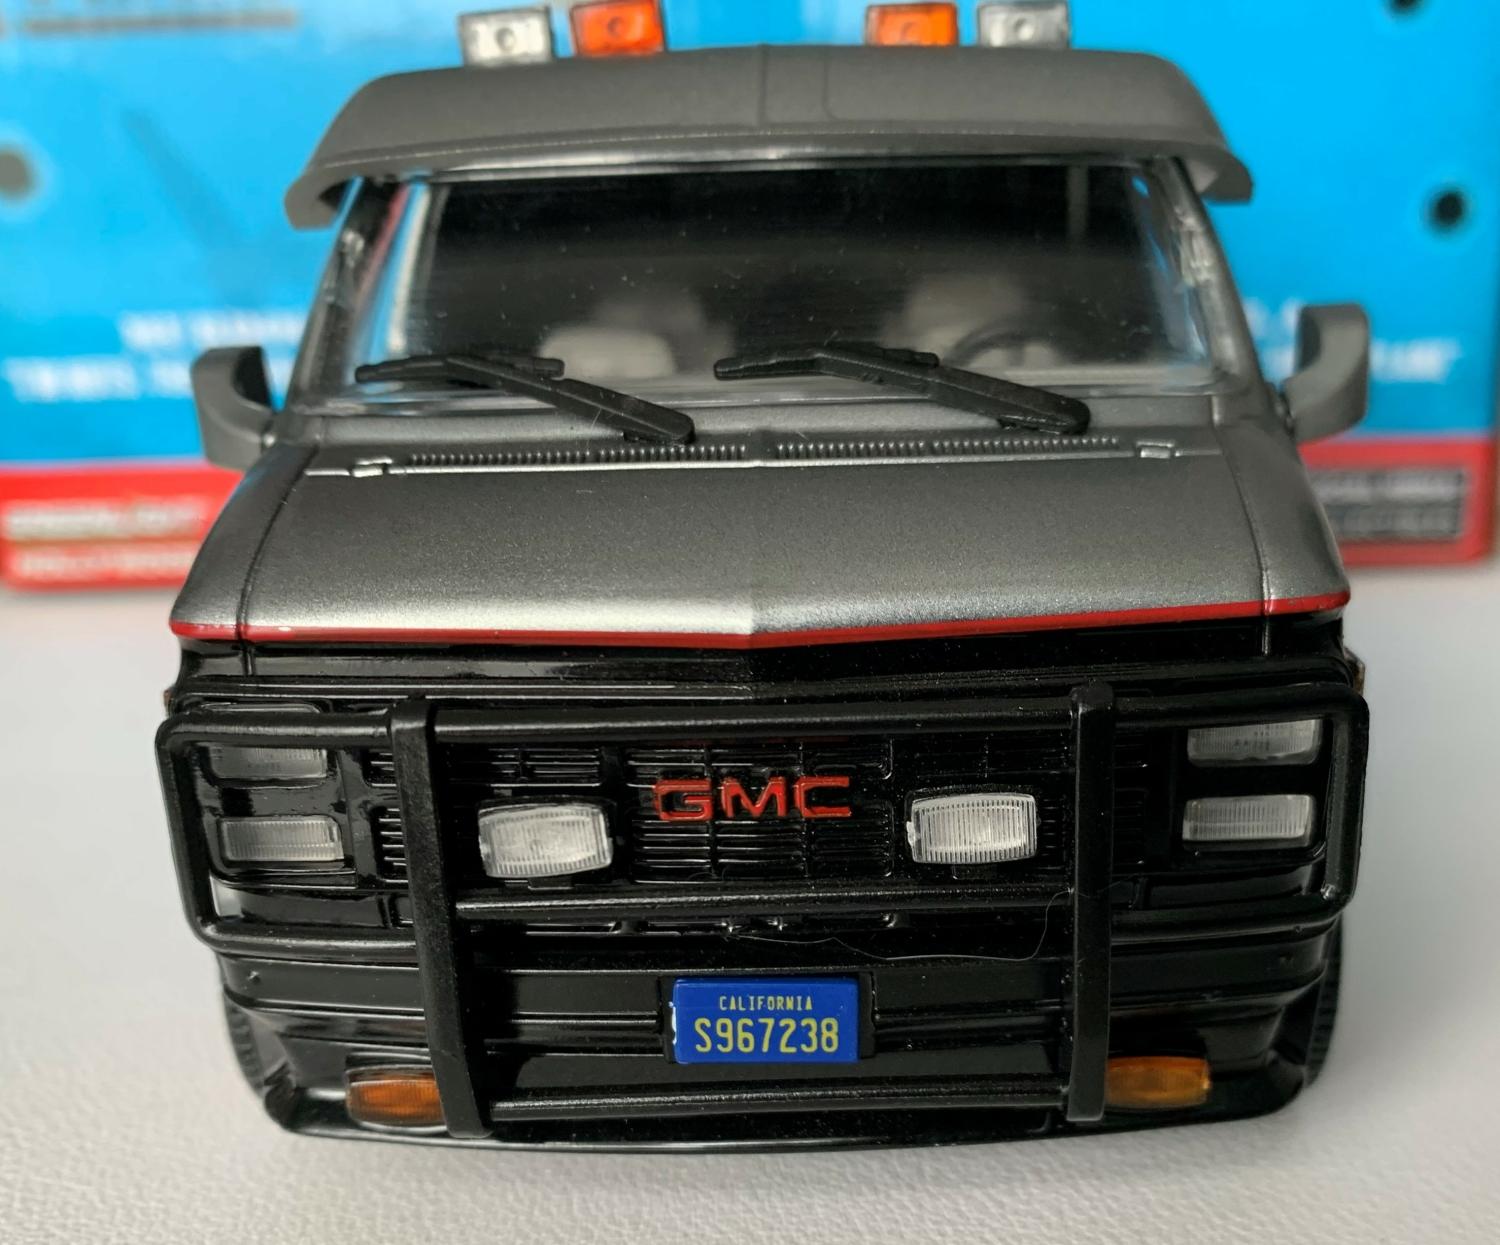 The A Team GMC Vandura 1983 in black / silver 1:24 scale model from Greenlight